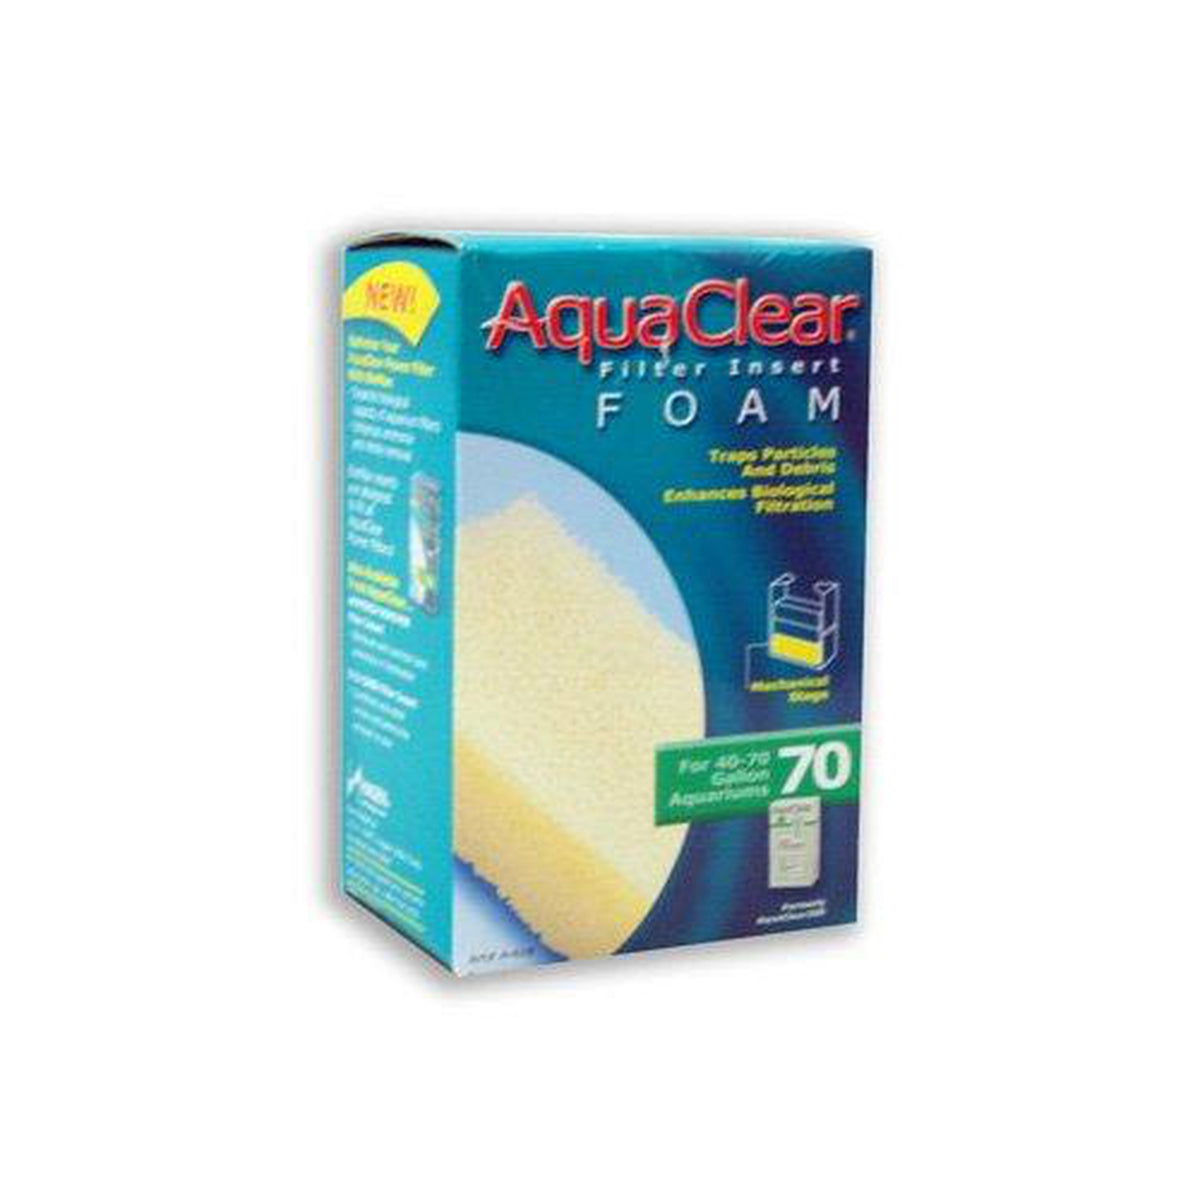 AquaClear 70 foam filter insert for Hang on back filter